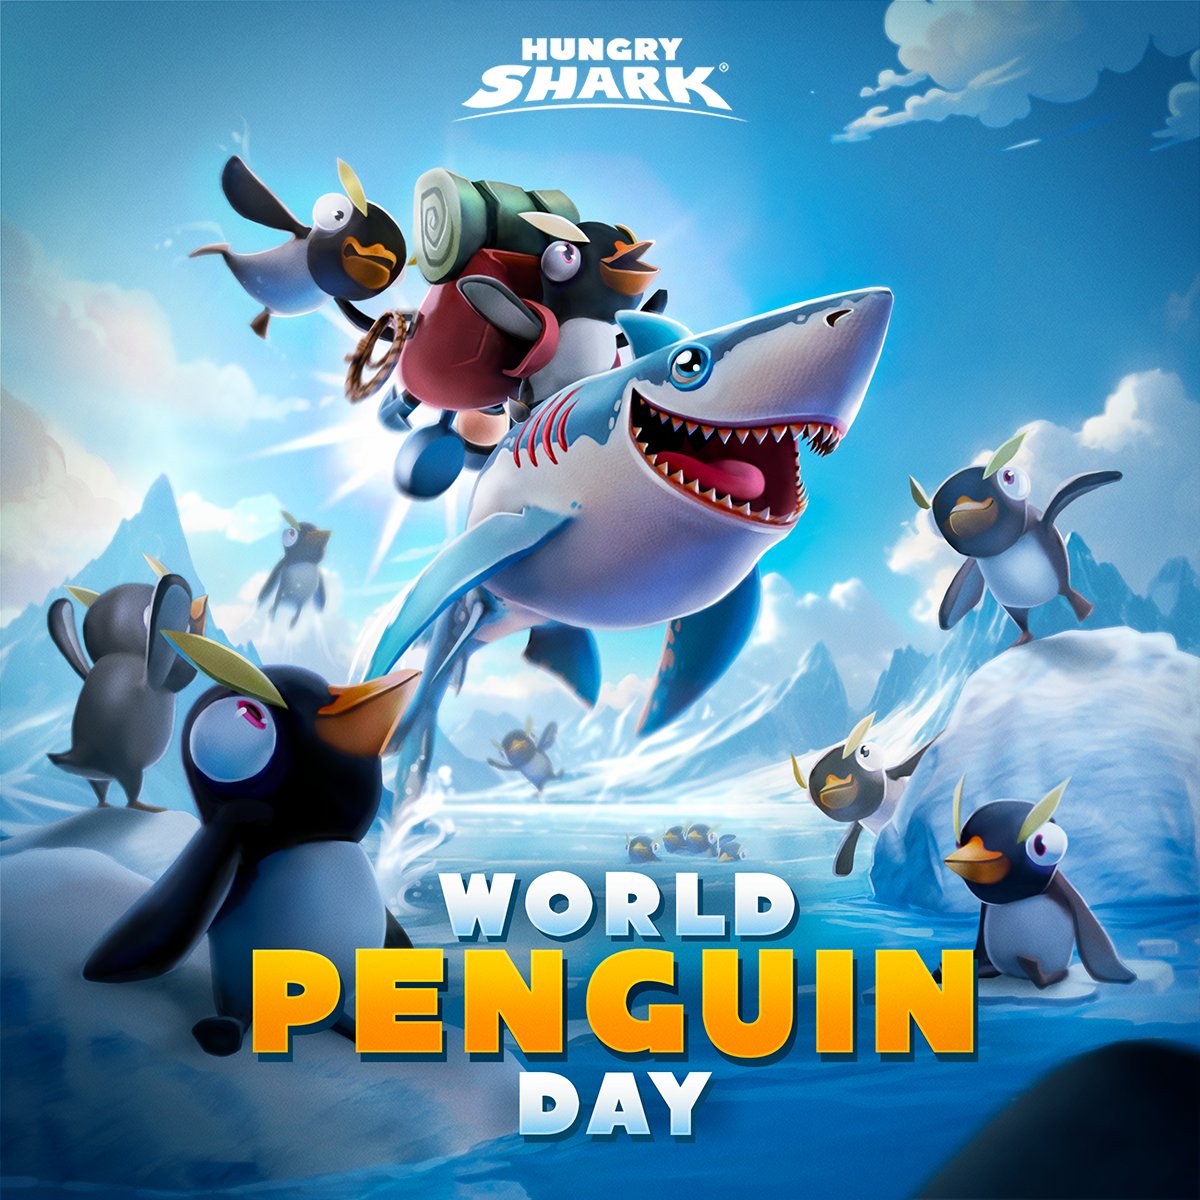 Happy World Penguin Day! 🎉🐧 Join us in celebrating our flippered friends on #HungryShark. 🦈 Let’s honor our tuxedo-clad friends by pledging to protect their icy habitats. 🌊💙 #WorldPenguinDay